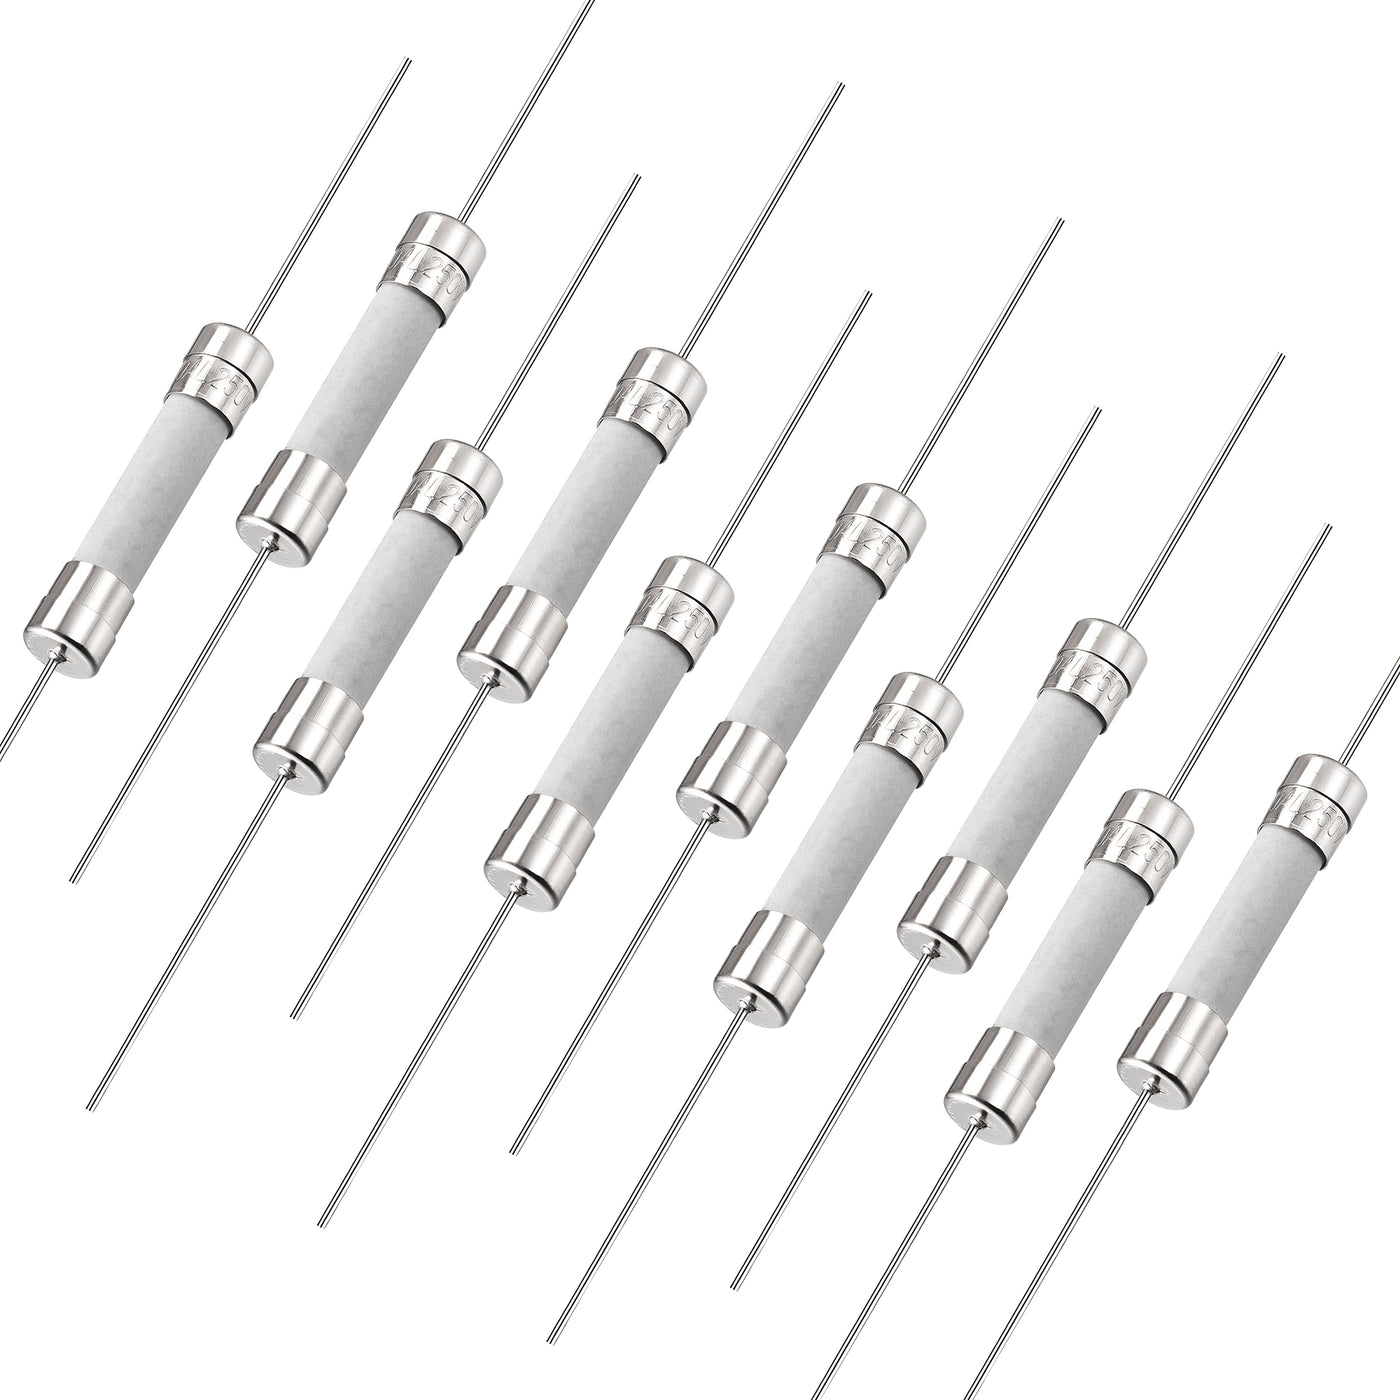 uxcell Uxcell Fast Blow Fuse Lead Wire Ceramic Fuses 6mm x 32mm 250V F10A 10Pcs